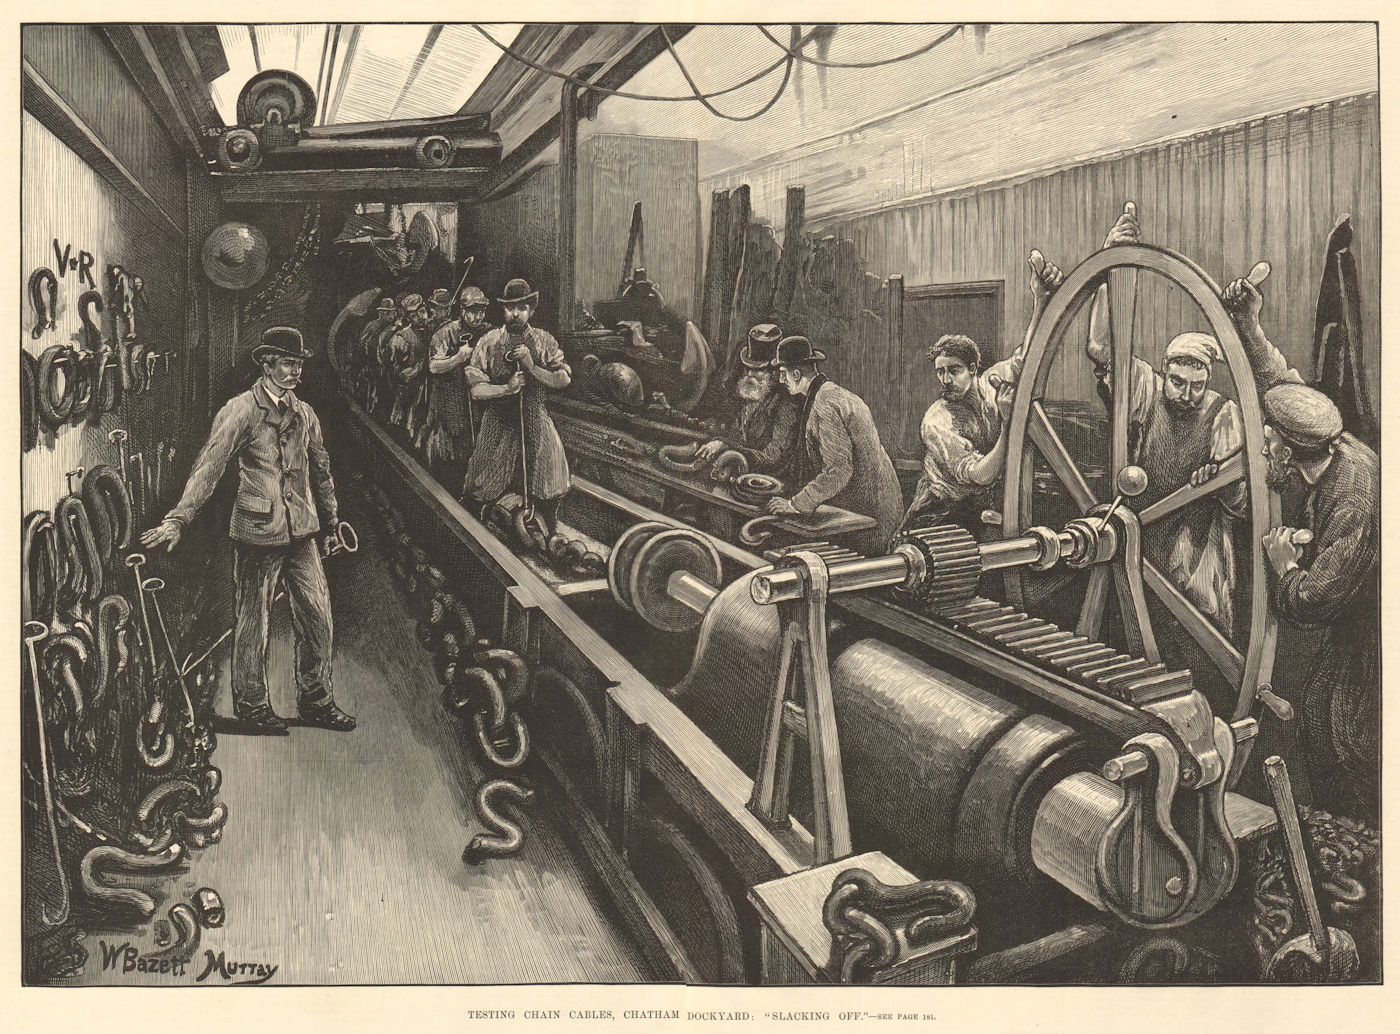 Associate Product Testing chain cables, Chatham Dockyard: "Slacking off". Kent. Telegraphs 1880